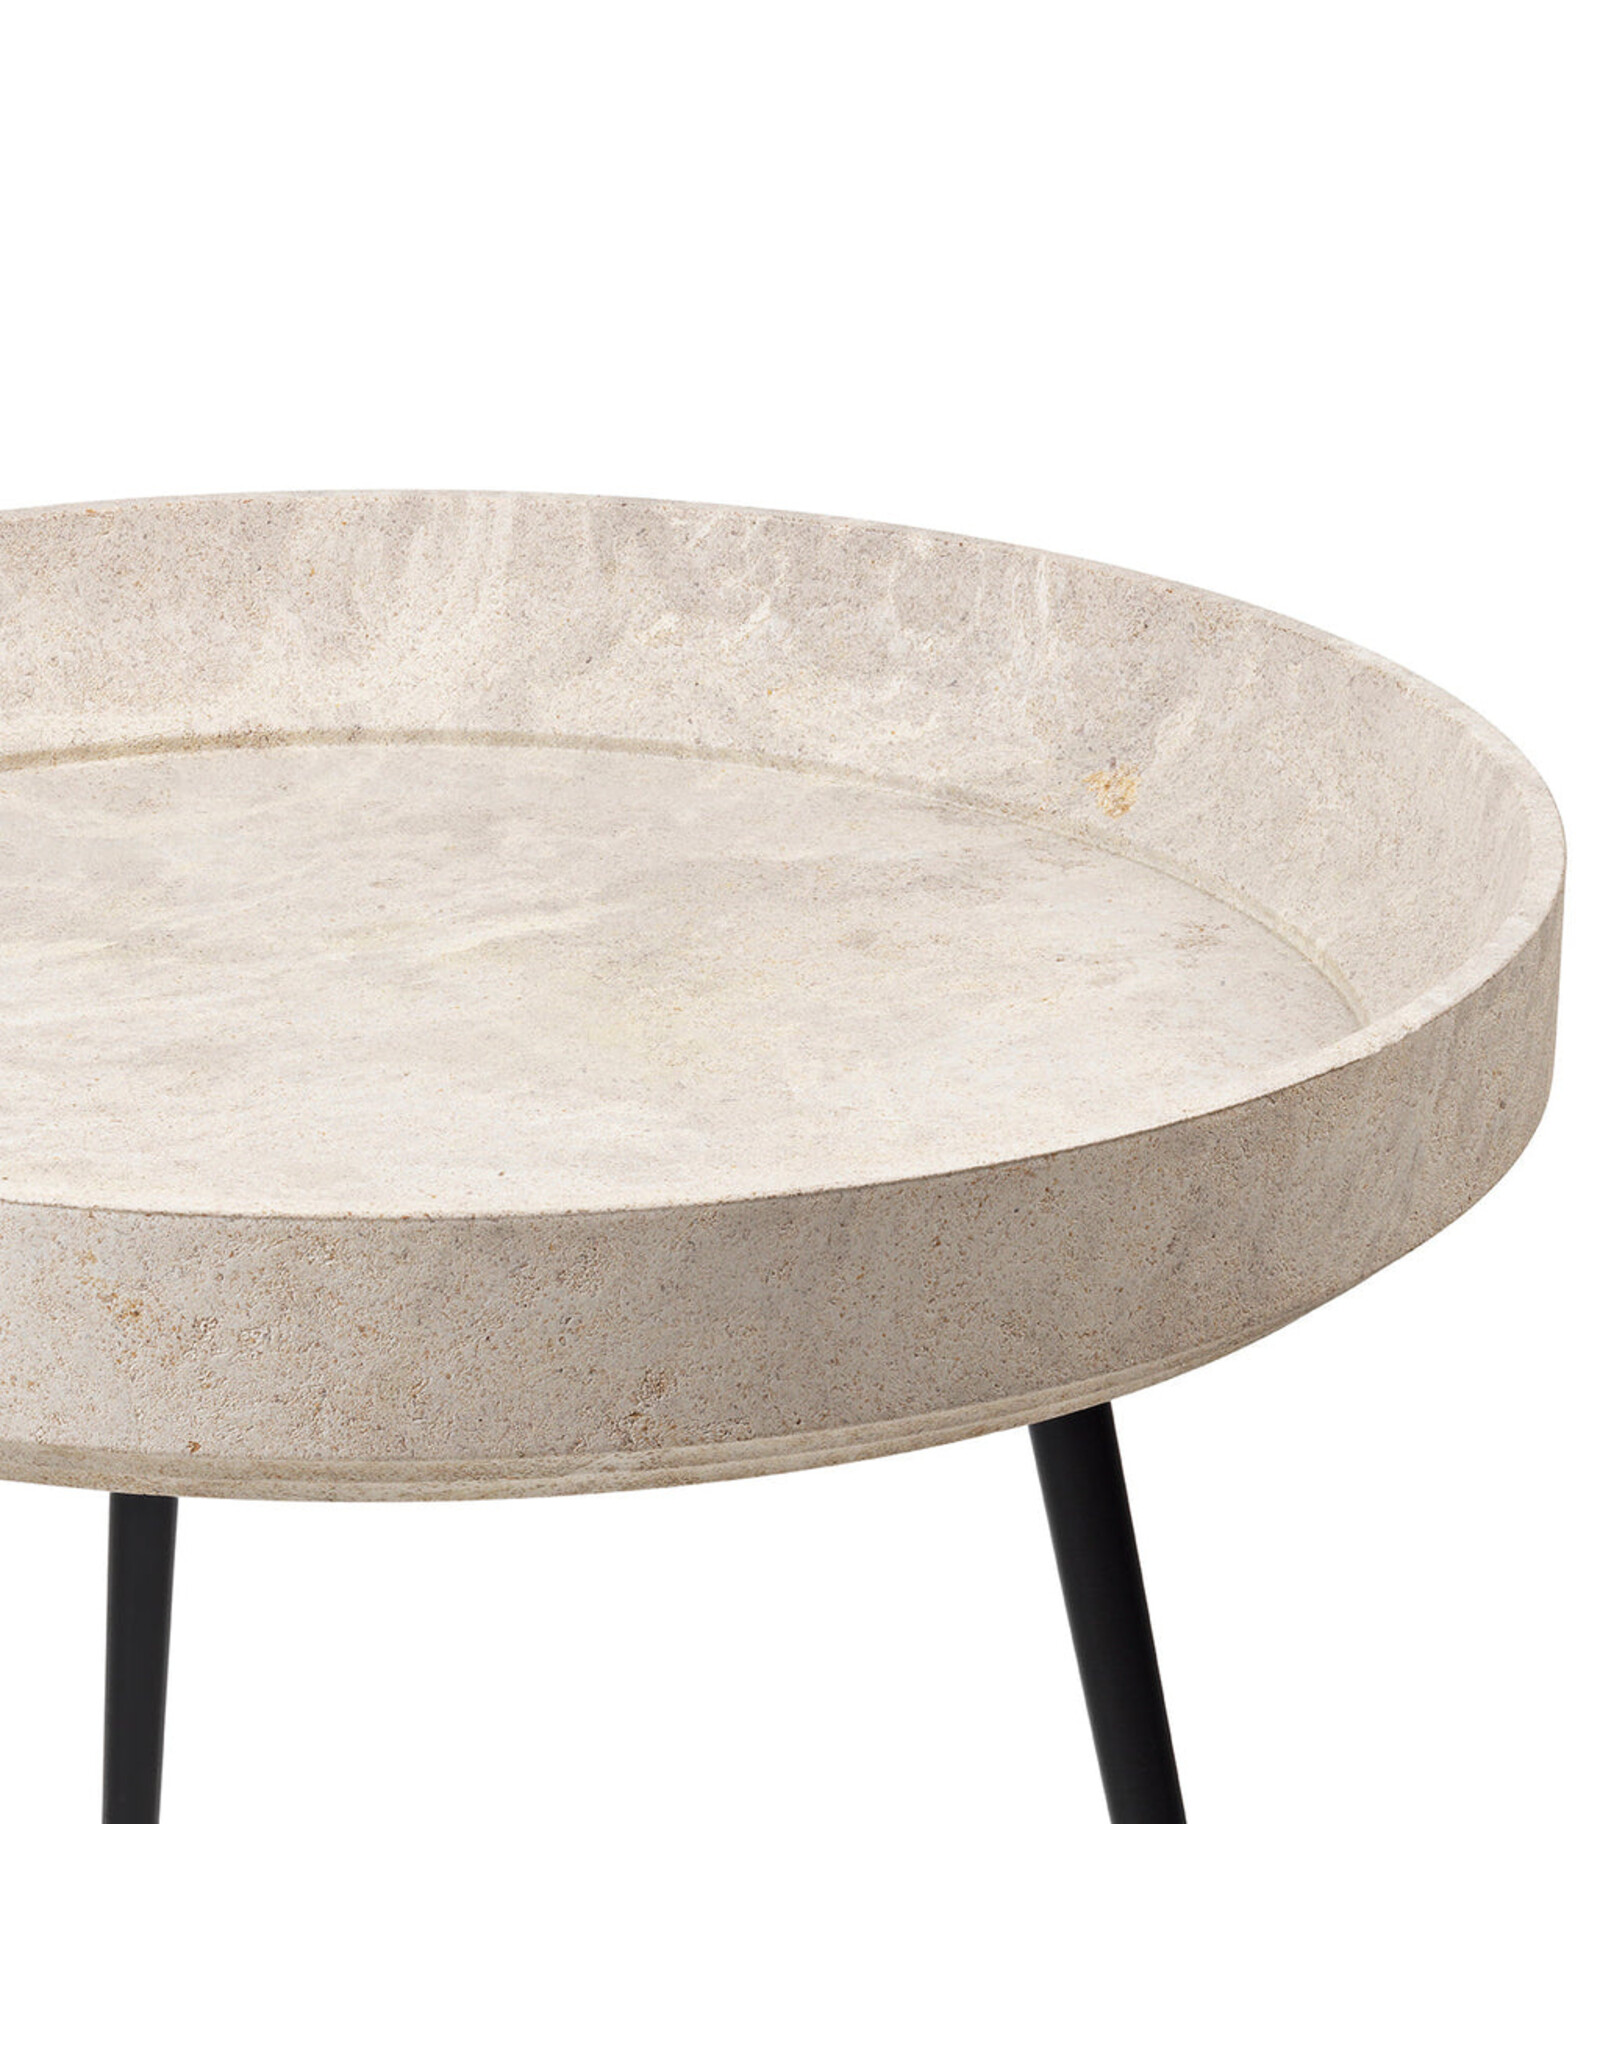 BOWL TABLE IN WOOD WASTE GREY